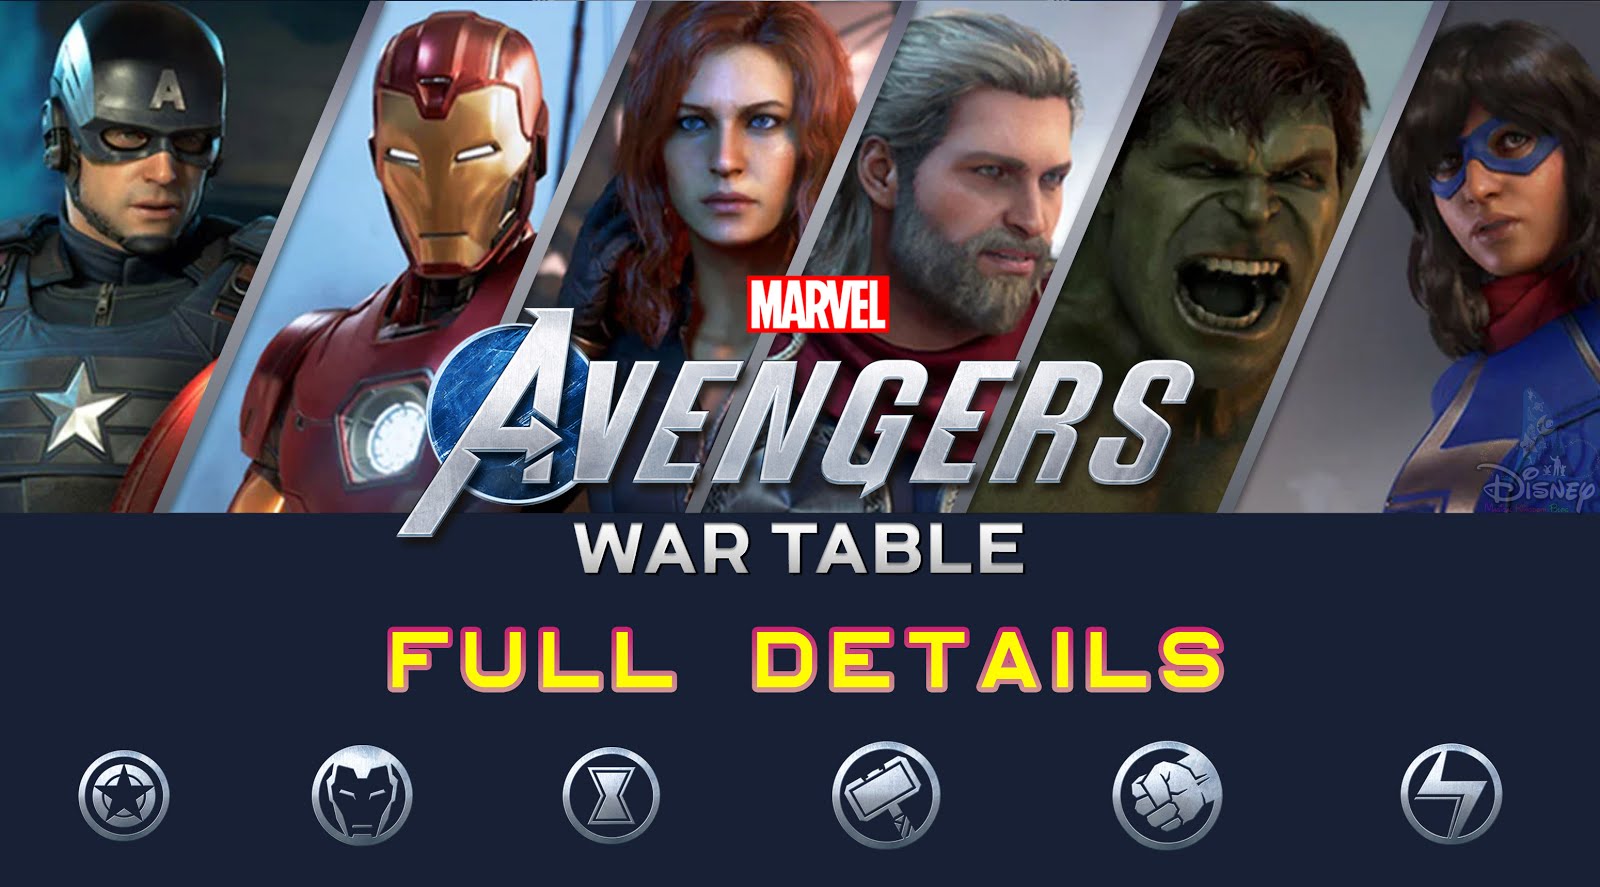 Caius necklace Percentage Marvel's Avengers WAR TABLE FULL Details, Co-op, Story Trailer, Gameplay,  Multiplayer, Beta access | Disney Magical Kingdom Blog